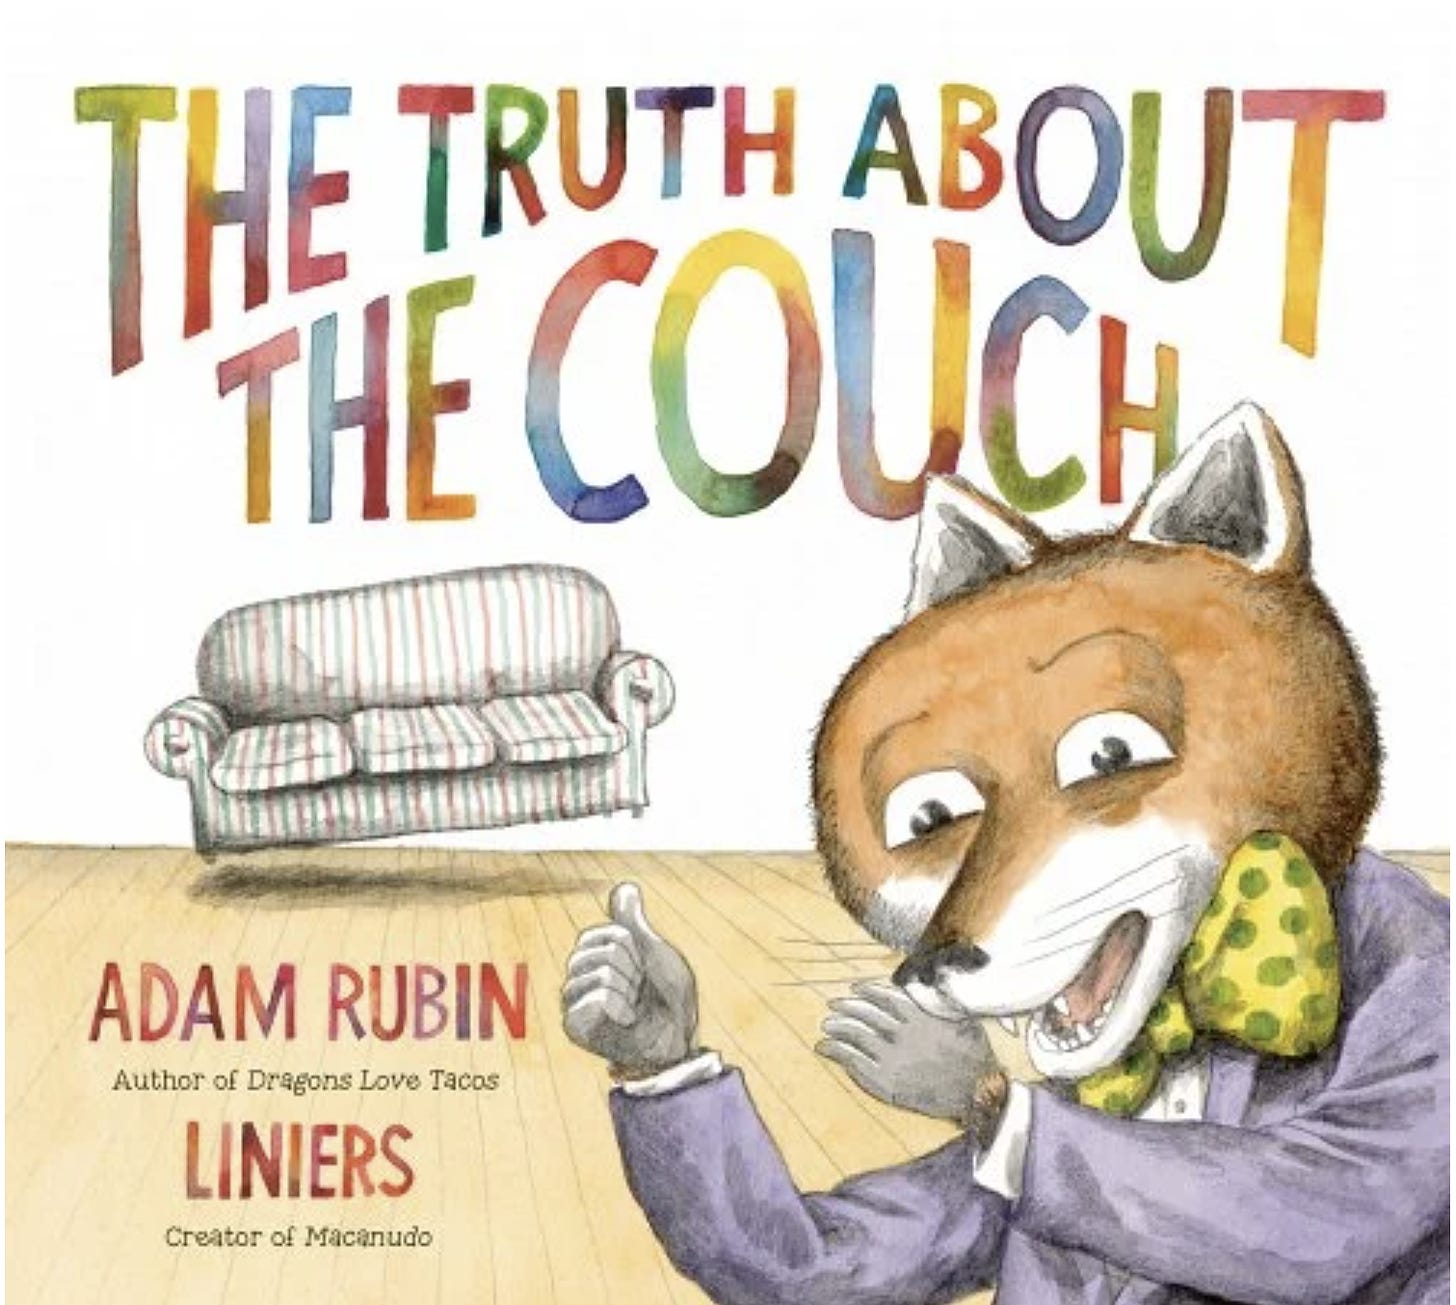 The Truth About the Couch, by Adam Rubin, illustrated by Liniers